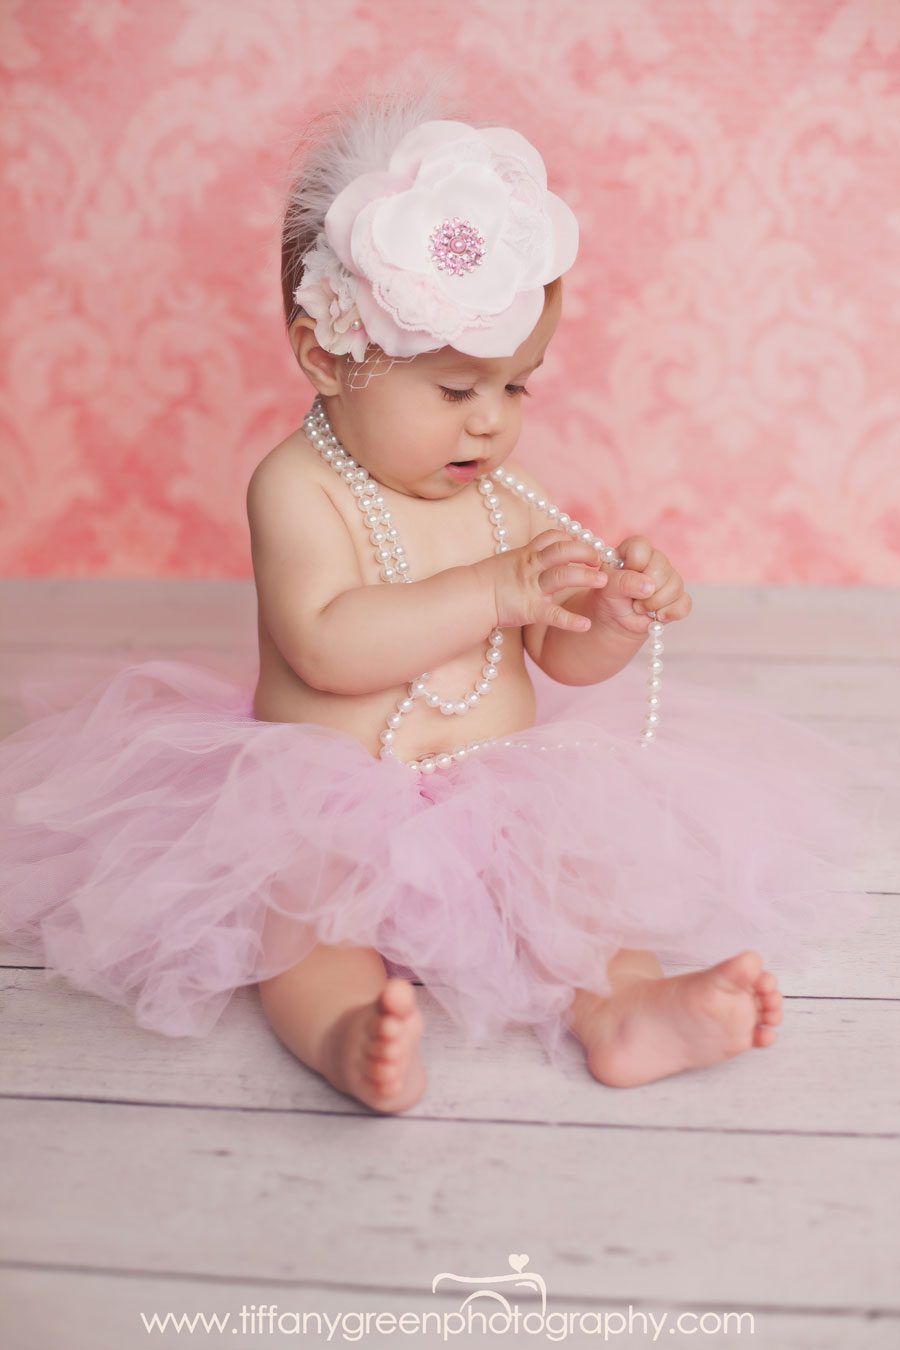 Baby Portraits in Tutu and Pearls